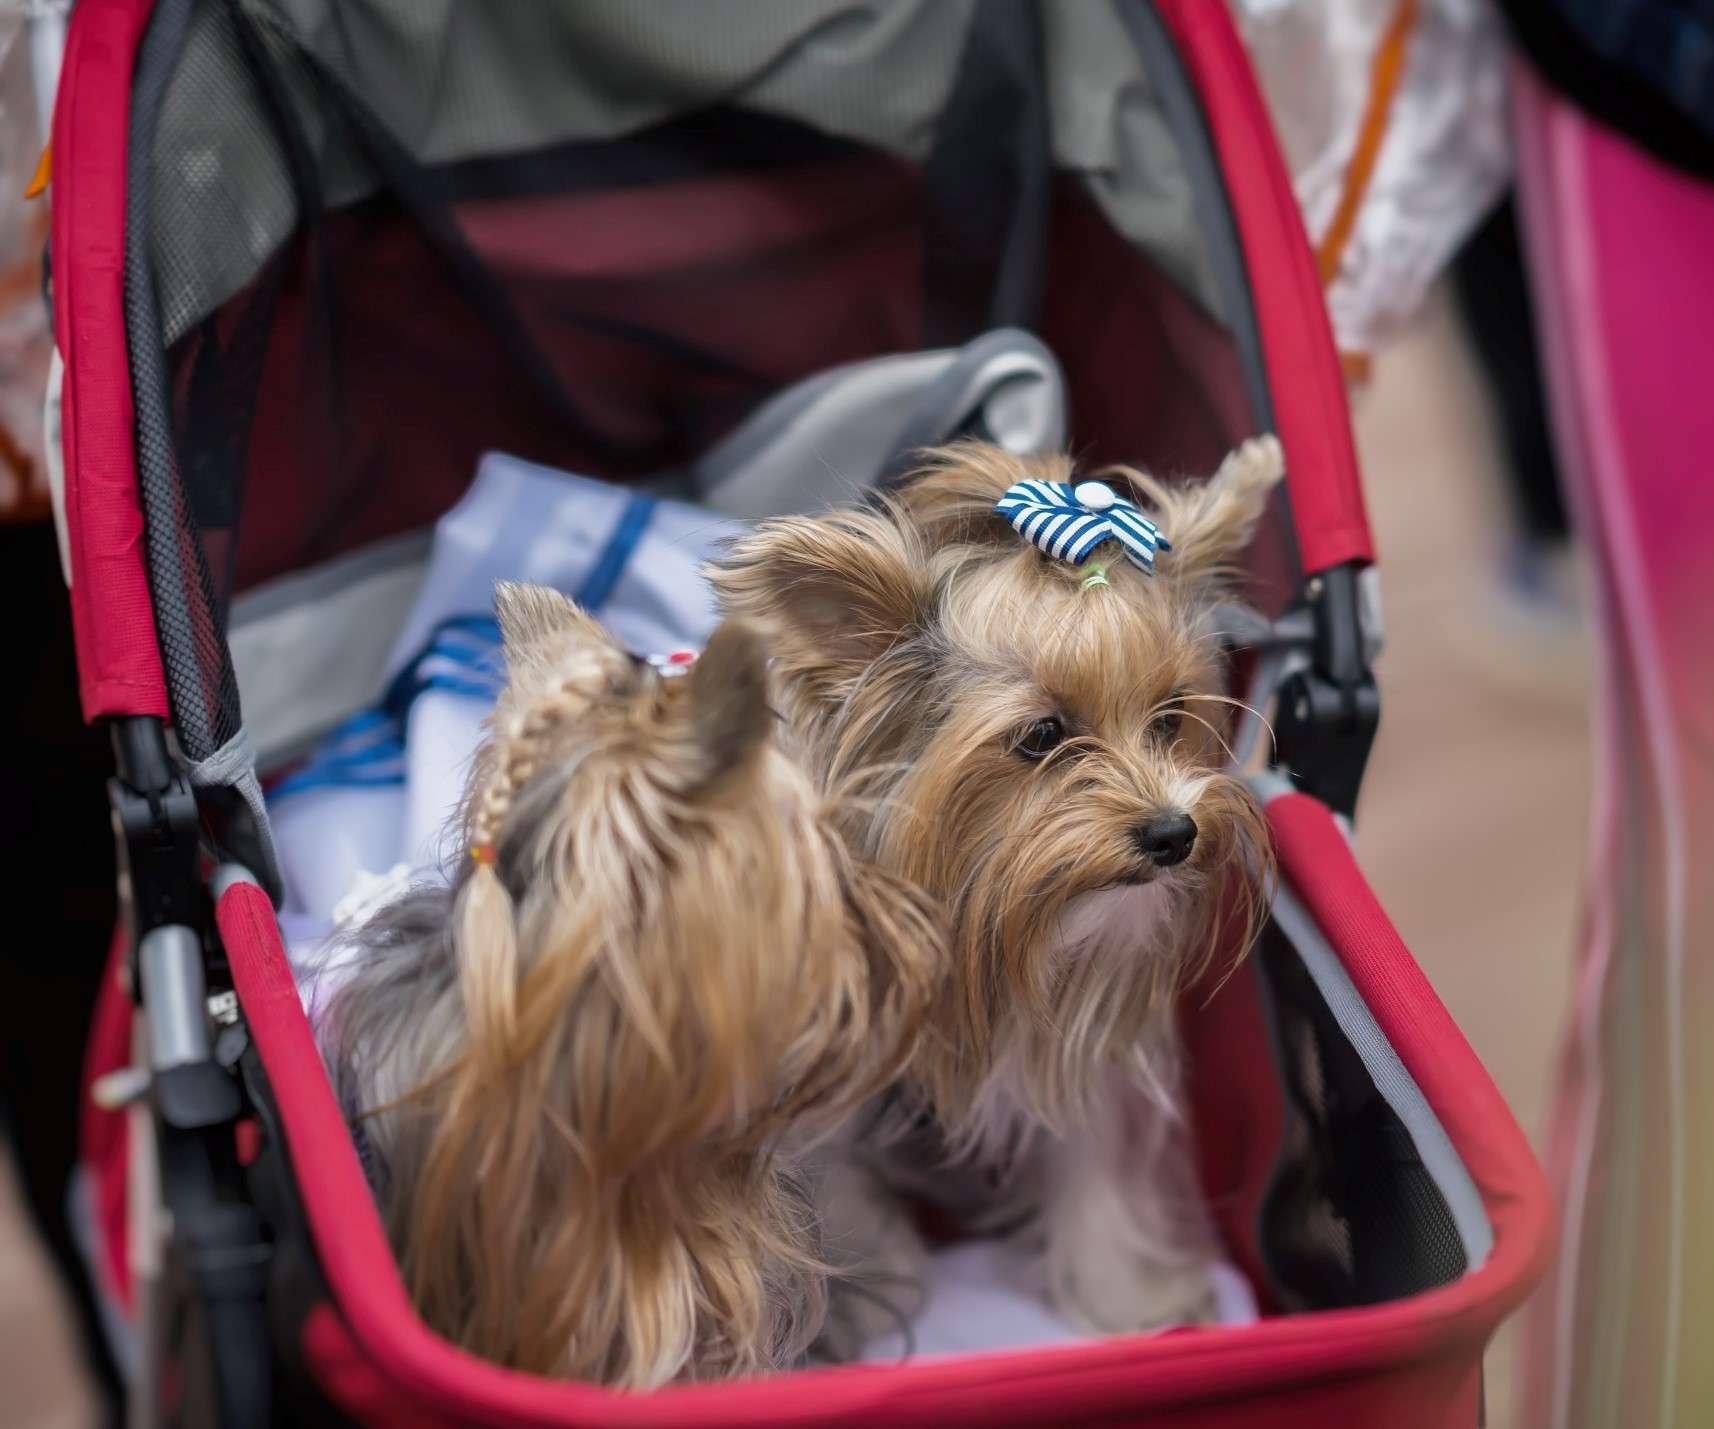 Two small dogs being pushed in dog stroller.